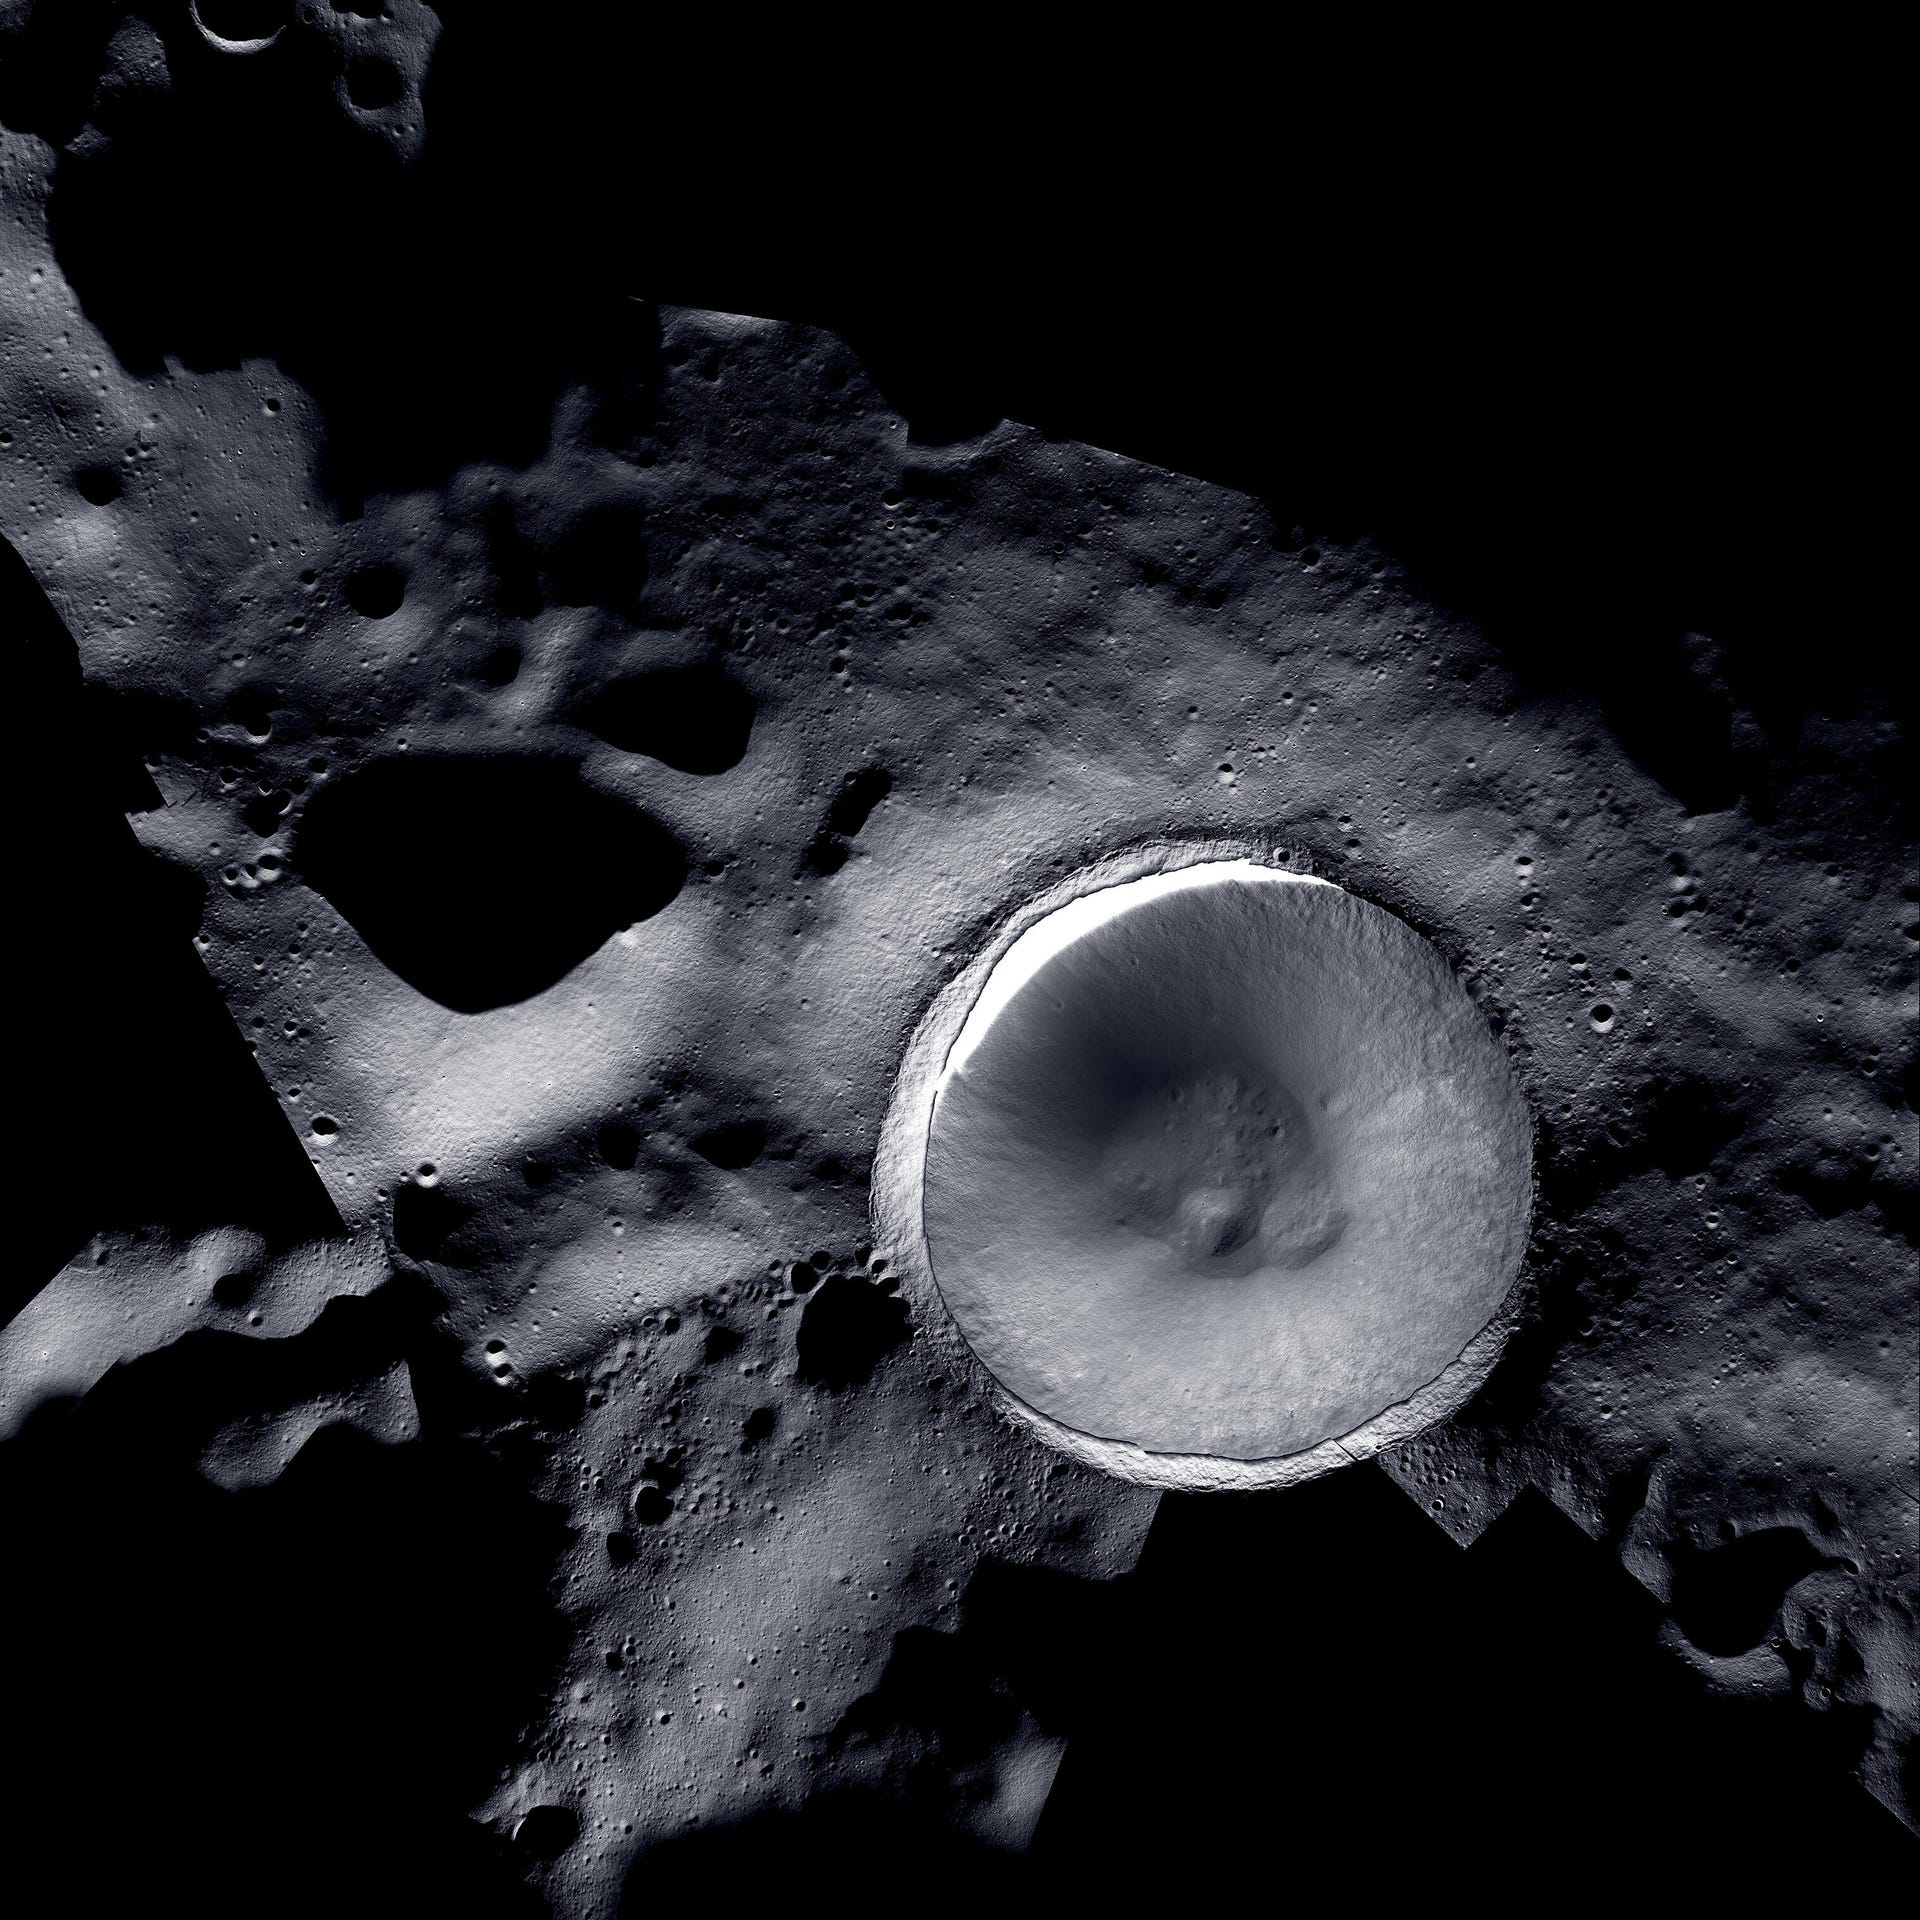 Stark black and white view of lunar surface with Shackleton Crater as a large round, brighter divot against a cratered dark landscape.